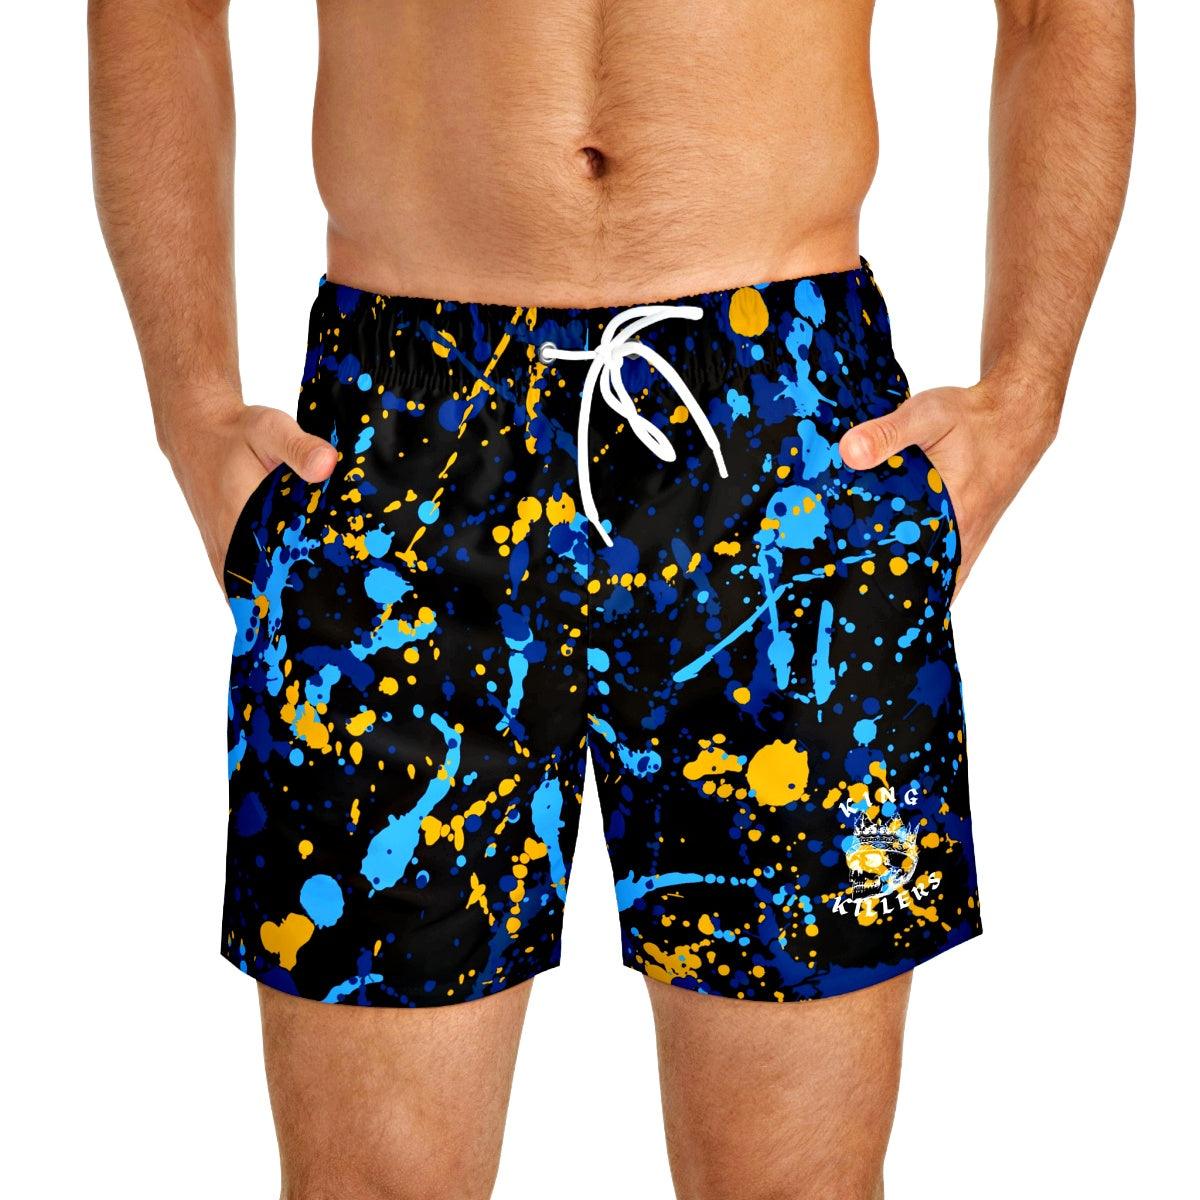 King Killers - Blue and Gold Shorts